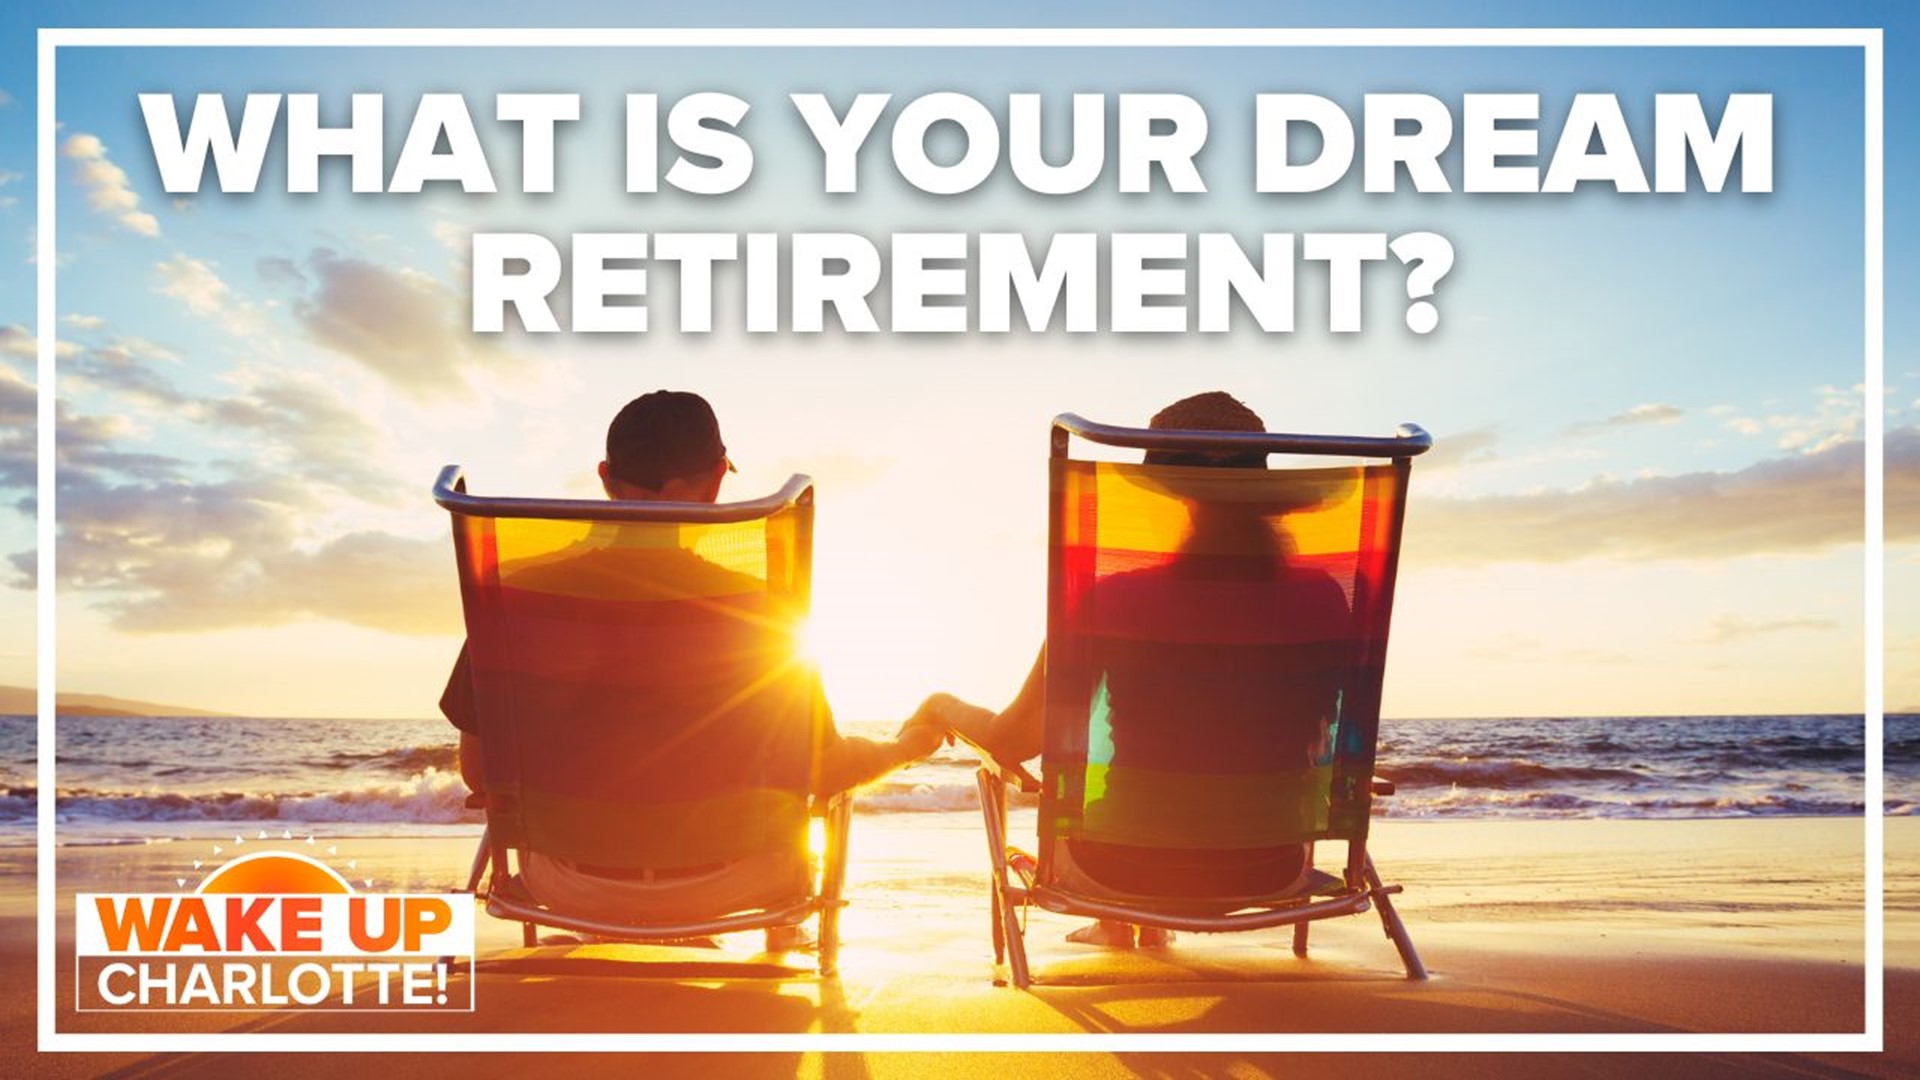 A new survey found people are traveling the world or heading back to work once they hire retirement. What's your dream retirement plan?